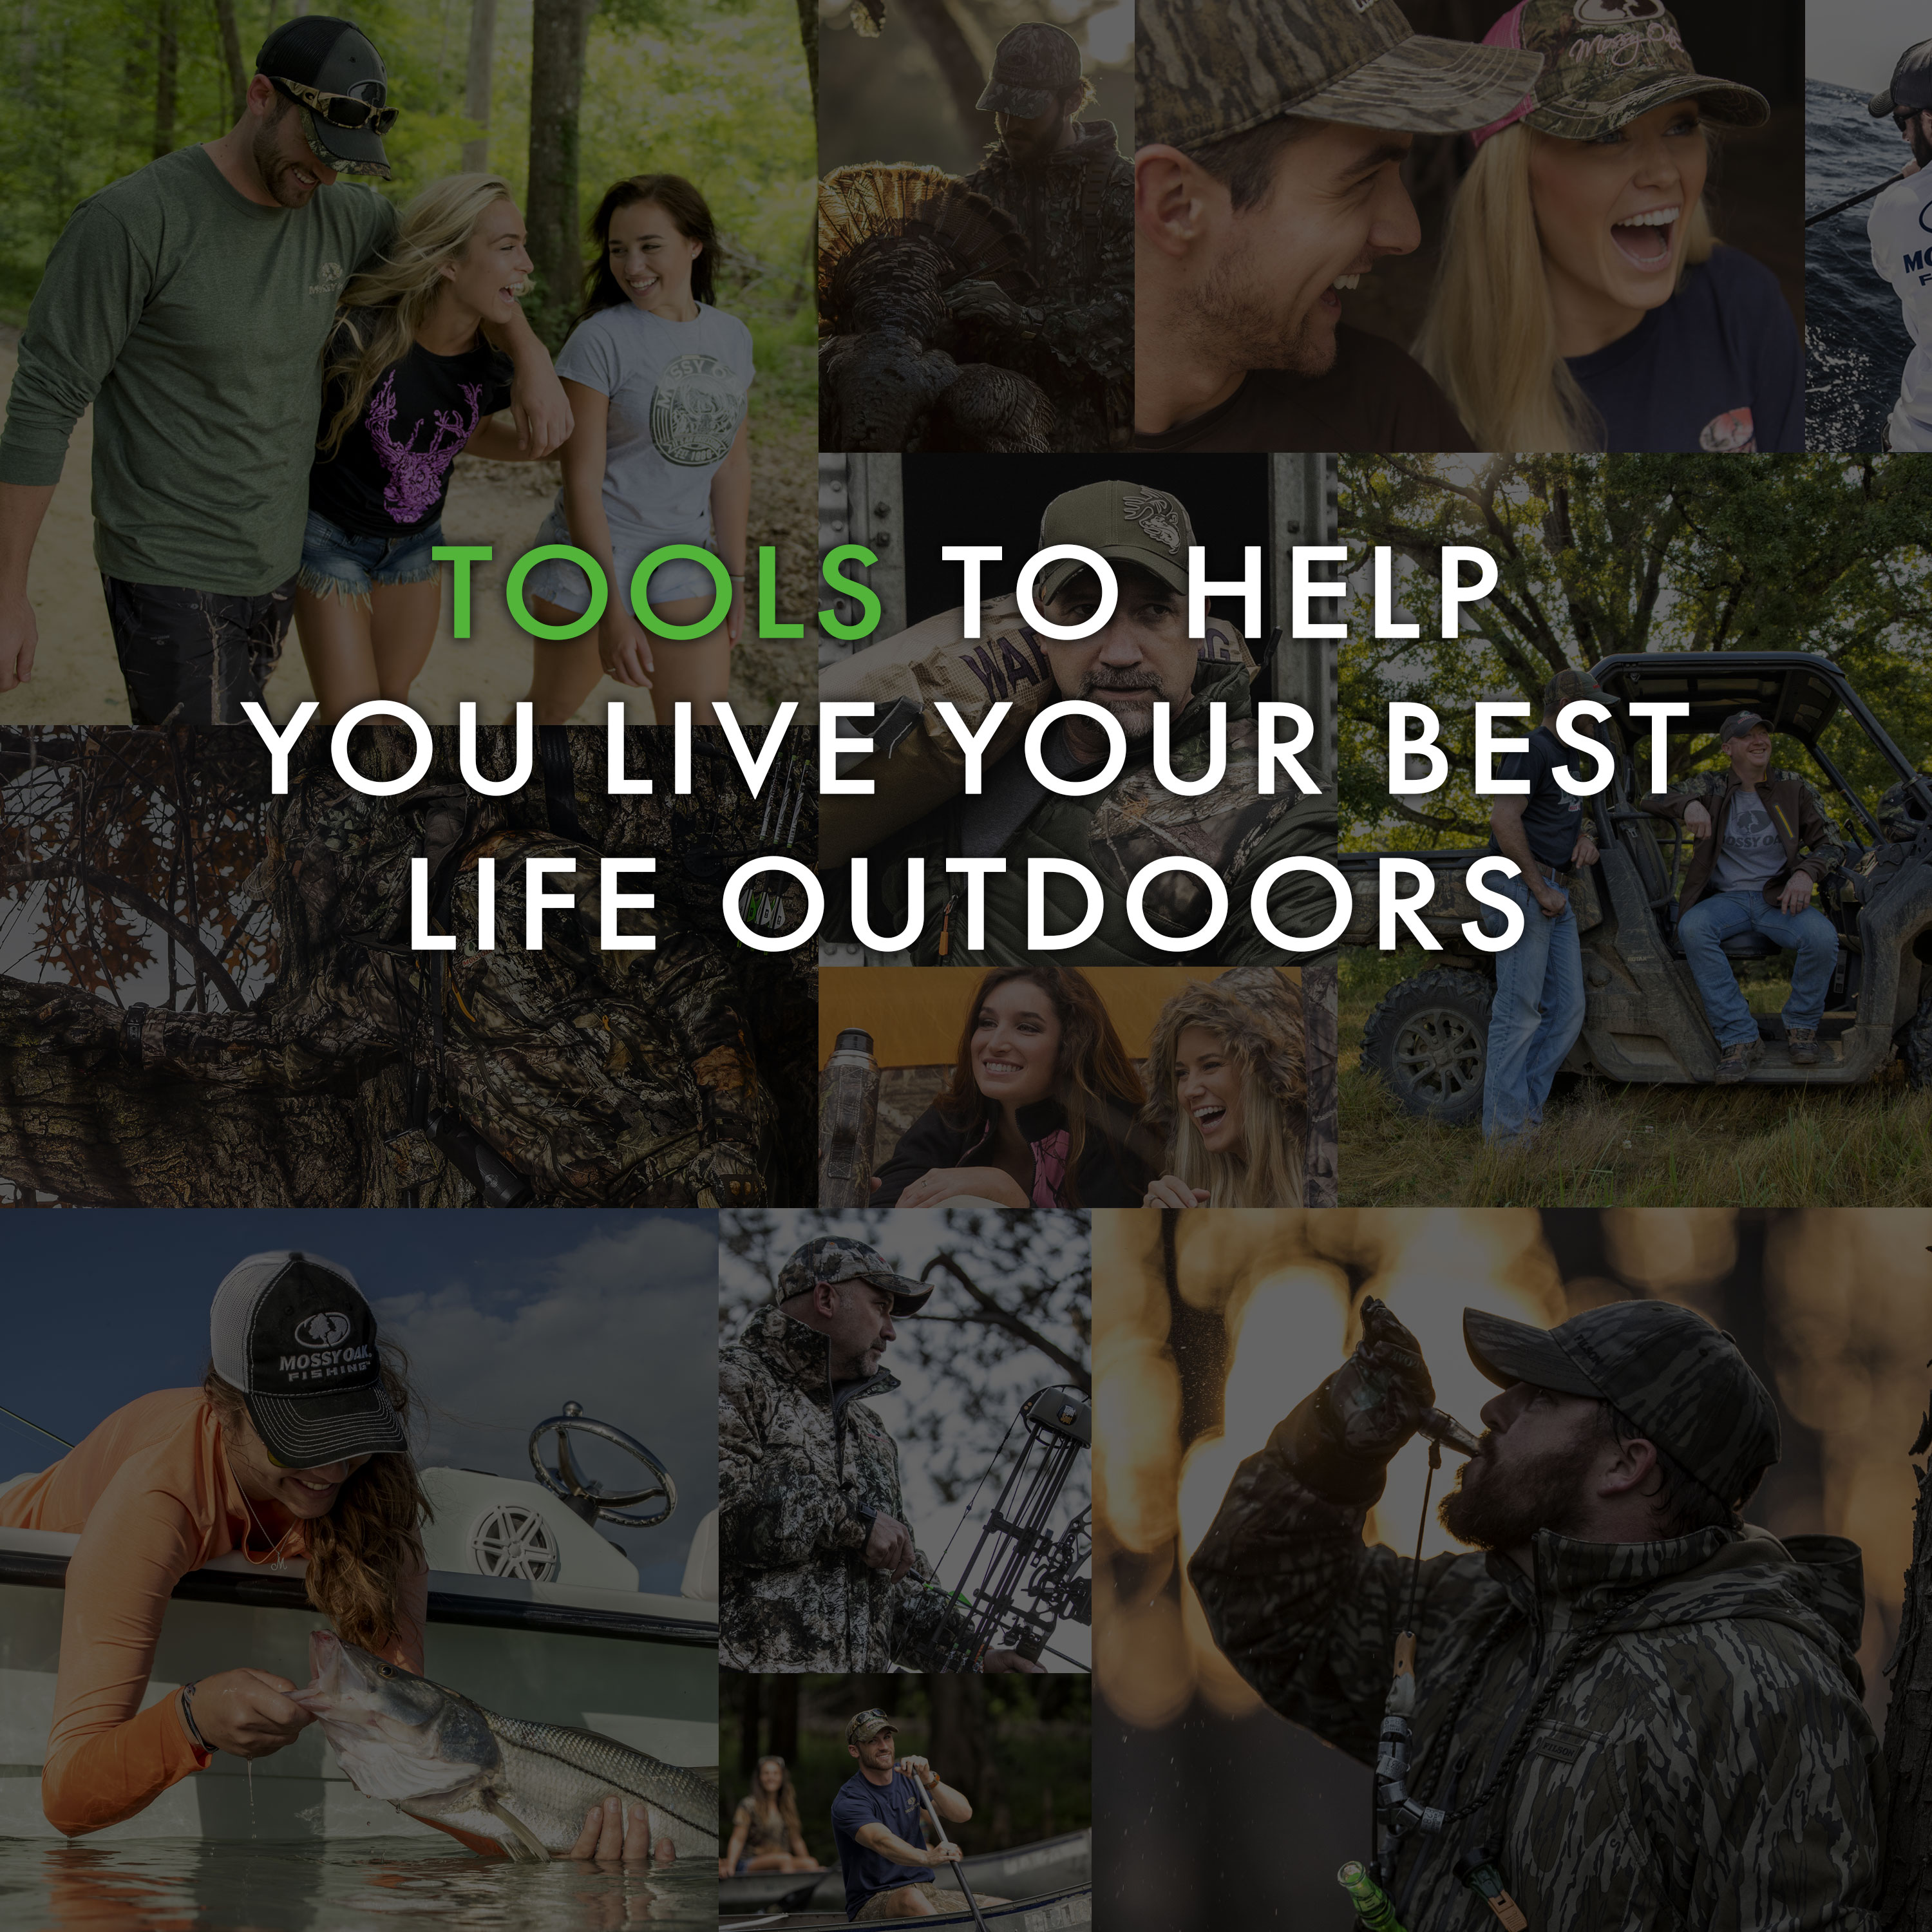 Tools to help you live your best life outdoors.